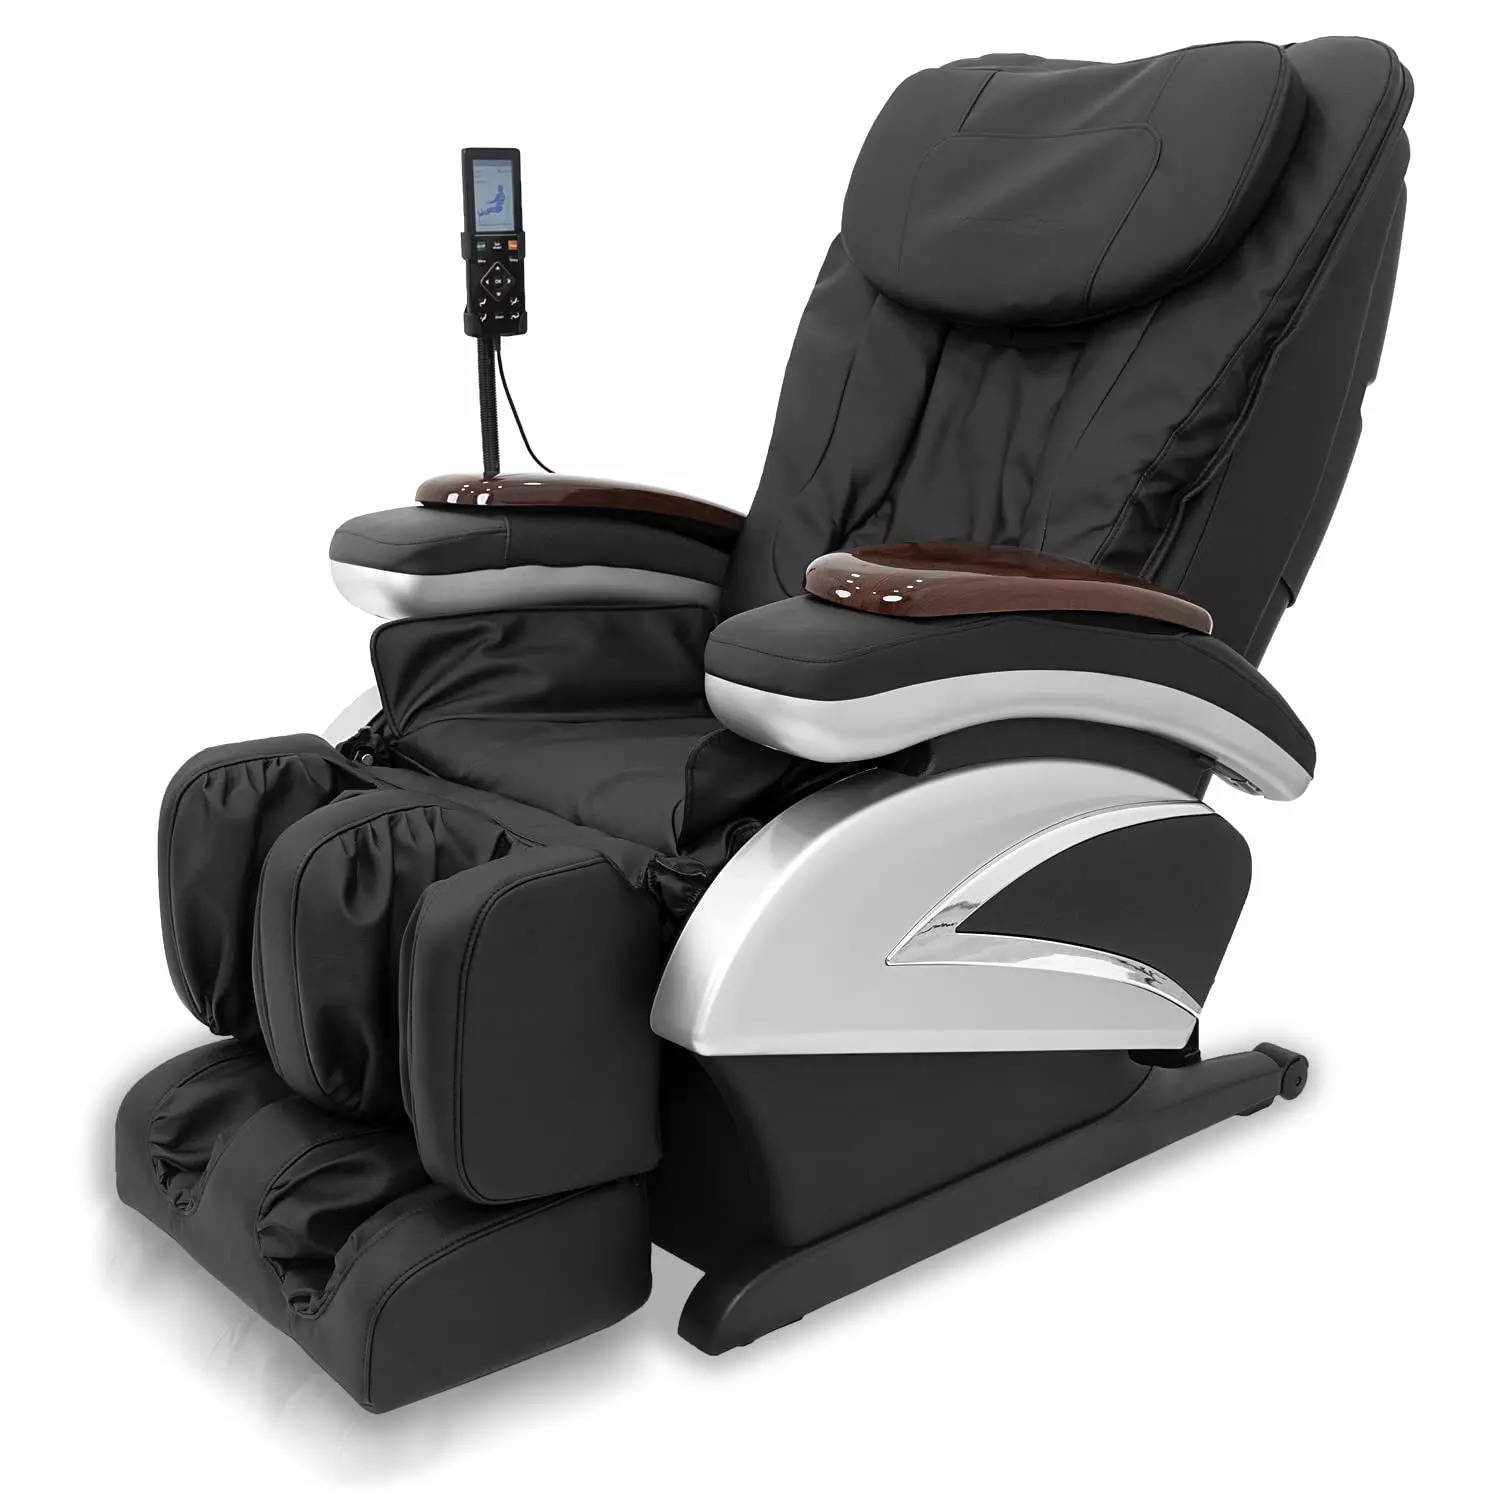 Fighting Back Pain with a Massage - RELAXONCHAIR